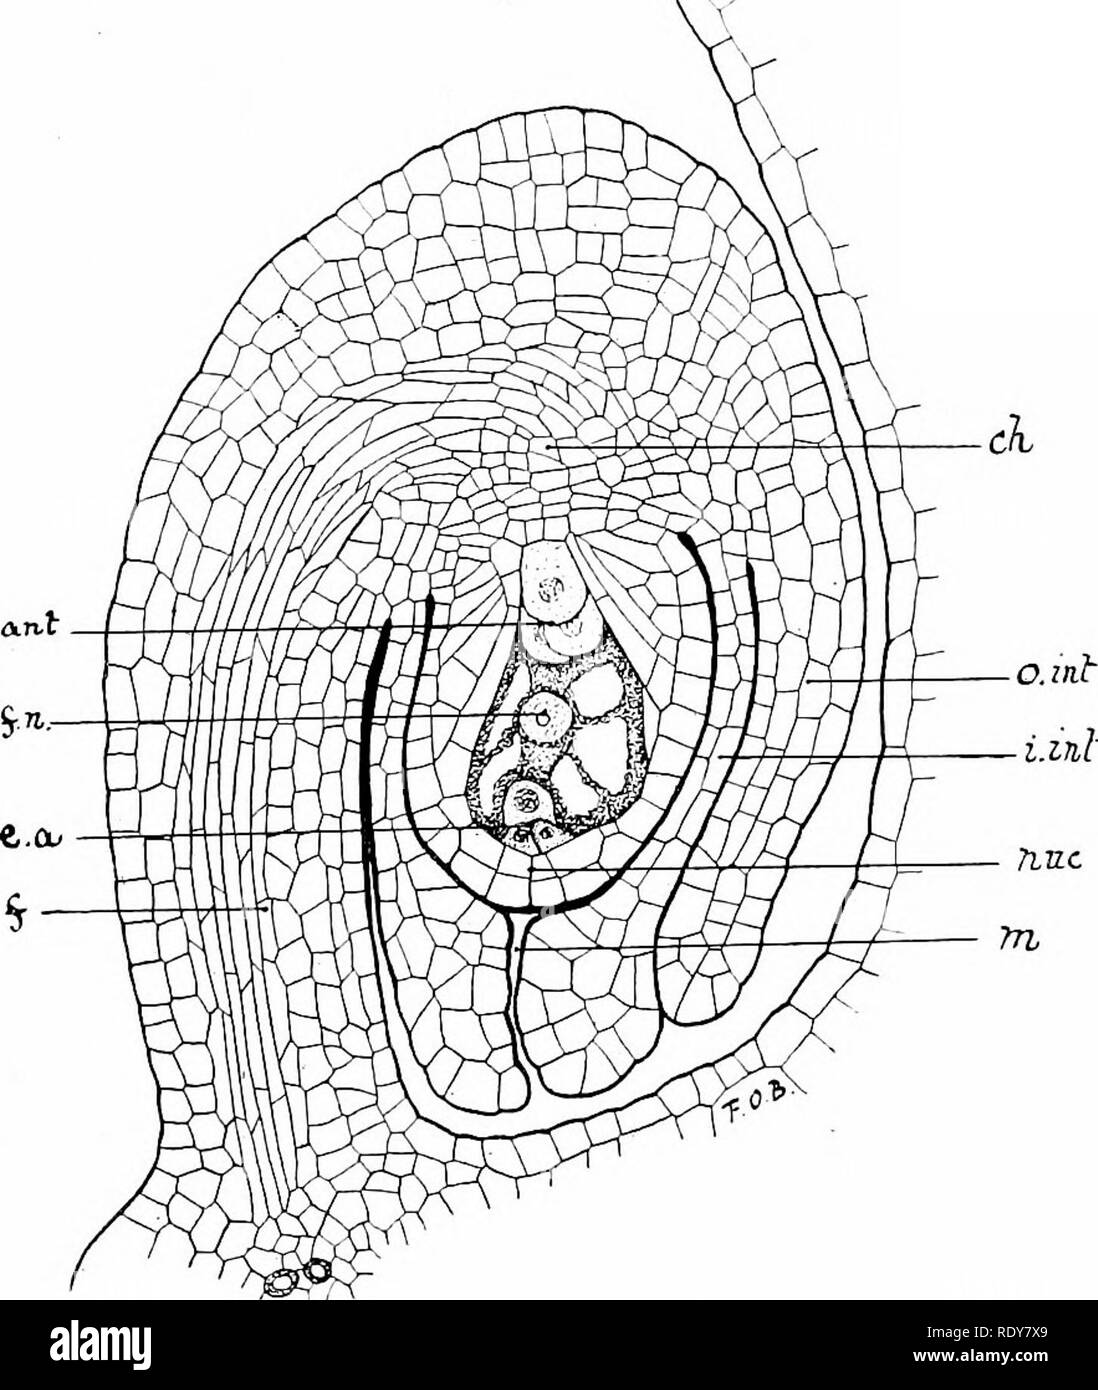 . Botany of the living plant. Botany. 258 BOTANY OF THE LIVING PLANT The ovule at the period when it is ready for fertihsation is more or less oval in form, and it is seated upon a stalk, the funiculus, which is usually short (Fig. 206). It consists of a central body of conical form, which is called the iiucellus. This is the actual mega-sporangium. It is invested by one, and frequently by two integuments, which are attached to its base, and cover it closely, leaving only a very narrow channel. Fig. zob. Median longitudinal section of an ovule of Caliha, at the period of fertilisation. /=funic Stock Photo